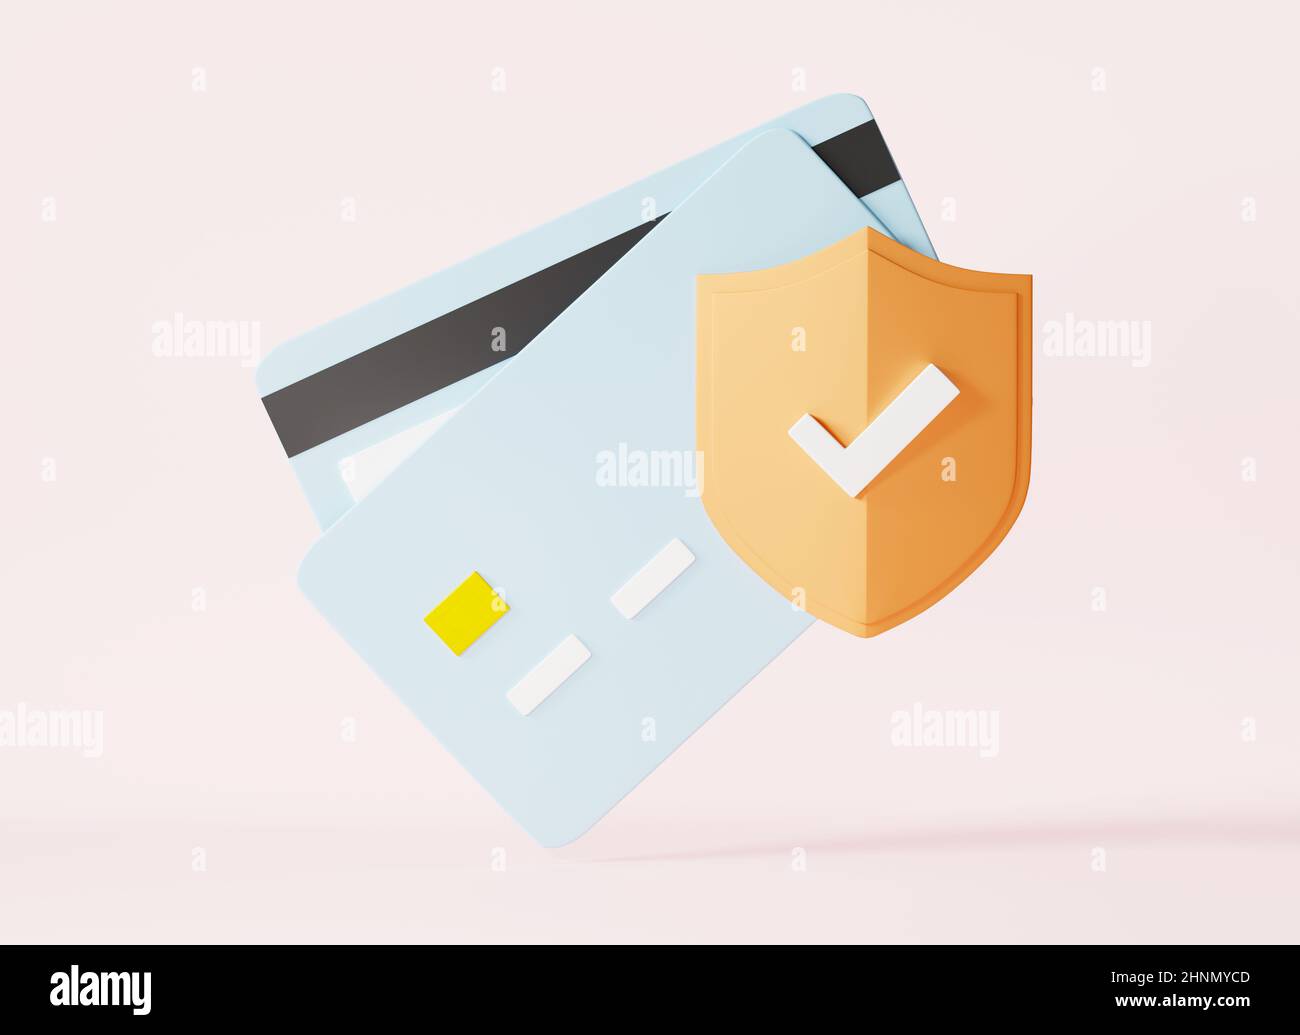 Credit card with lock shaped icon, Locked bank card secure transaction protection on pink background, Secure money payment online system sign, graphic Stock Photo